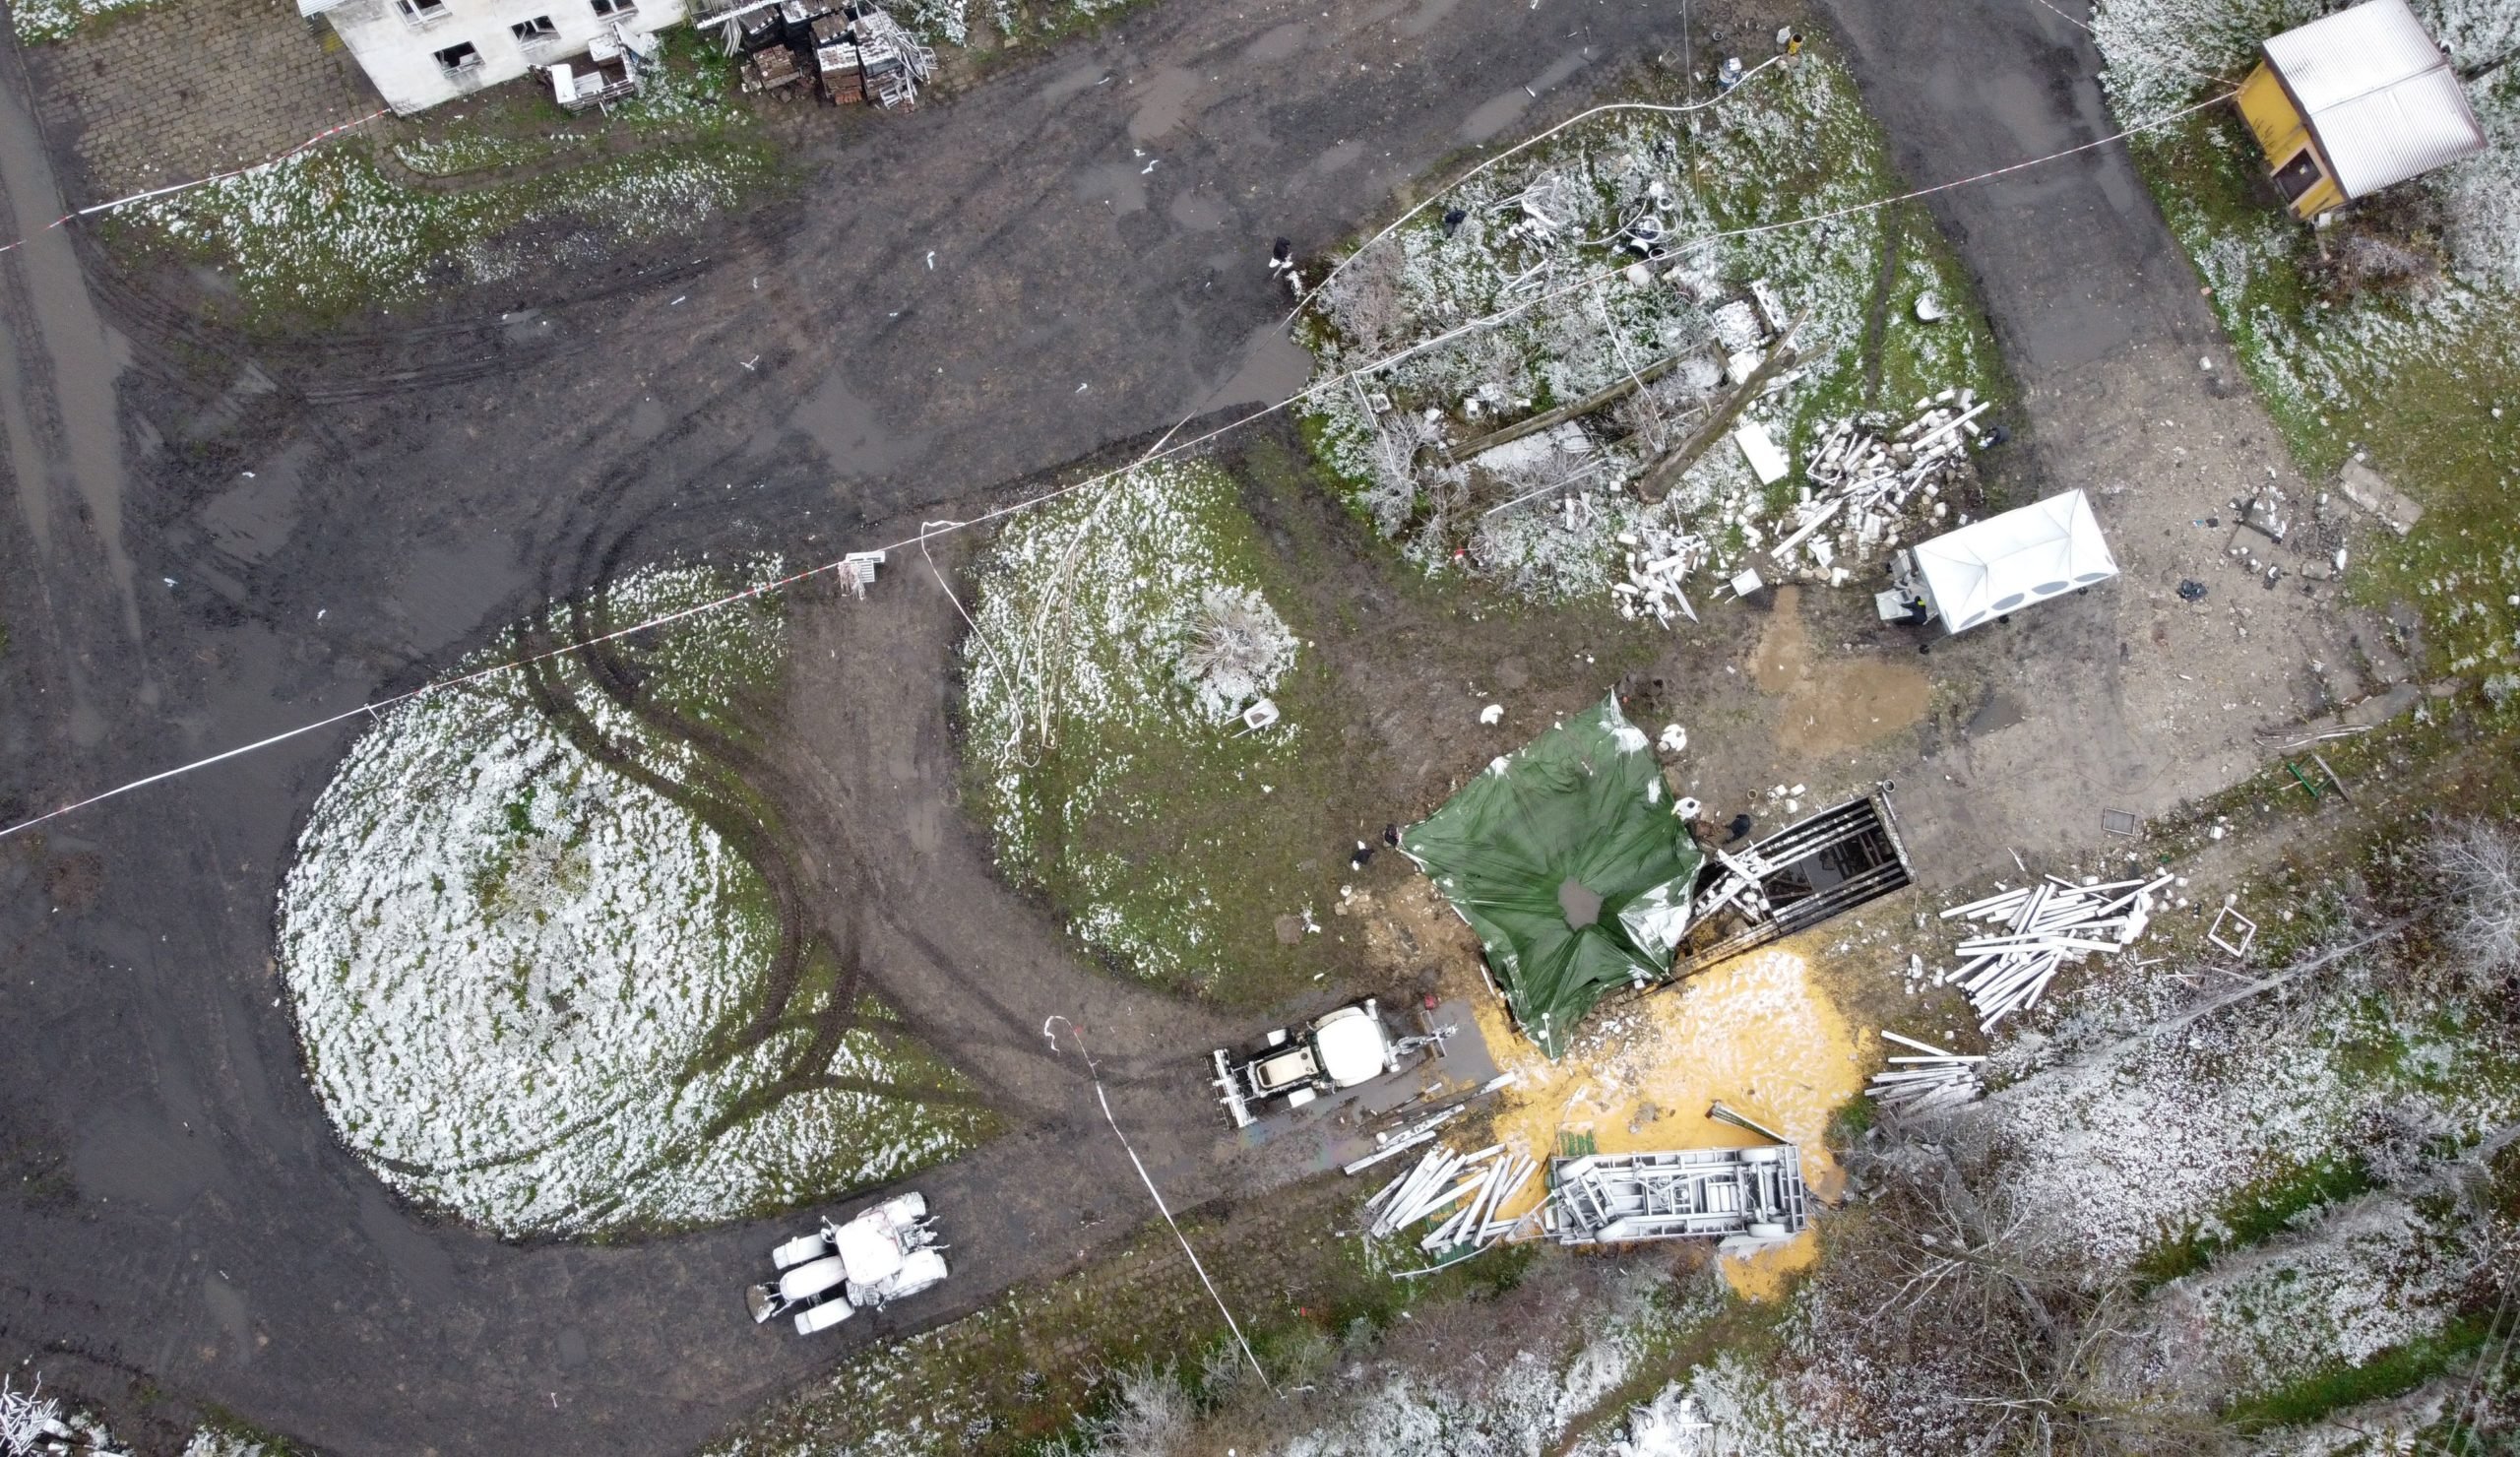 Aerial view taken on November 17, 2022 shows the site where a missile strike killed two men in the eastern Poland village of Przewodow, near the border with war-ravaged Ukraine on November 15, 2022. - The strike occurred in the afternoon of November 15, 2022, as Russia targeted Ukraine with a massive attack on civilian infrastructure, which has left millions of households without power. In the immediate aftermath of the incident there were fears it could mark a new escalation in the conflict, but by November 16, 2022 Poland announced the projectile likely originated from Ukraine's own air defences. That theory was then endorsed by Washington.